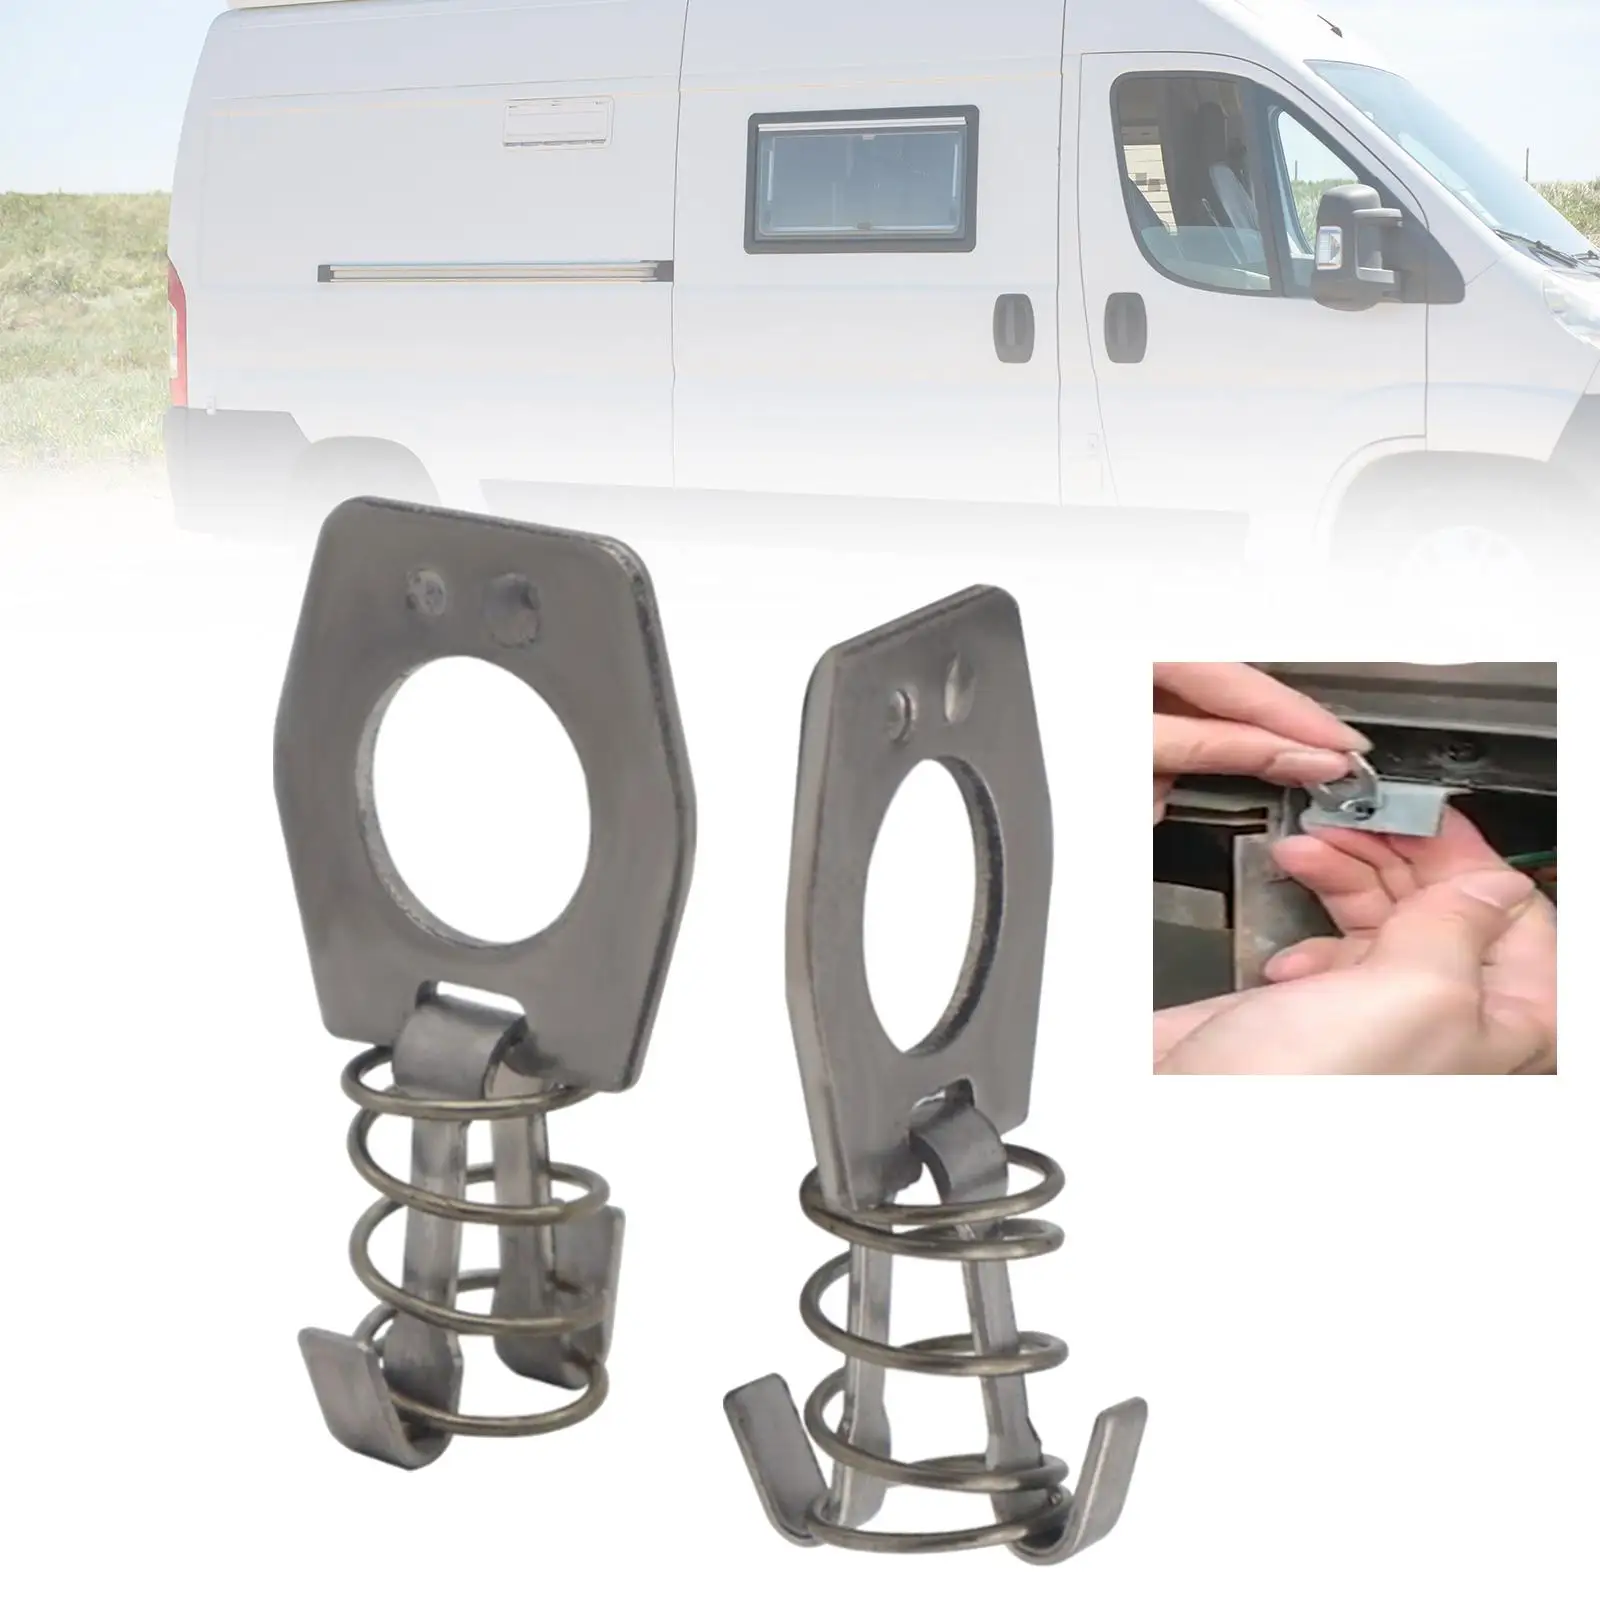 2x RV cam Lock, Door Latch Fastener, Cover Latch, Directly Replace for Trailers